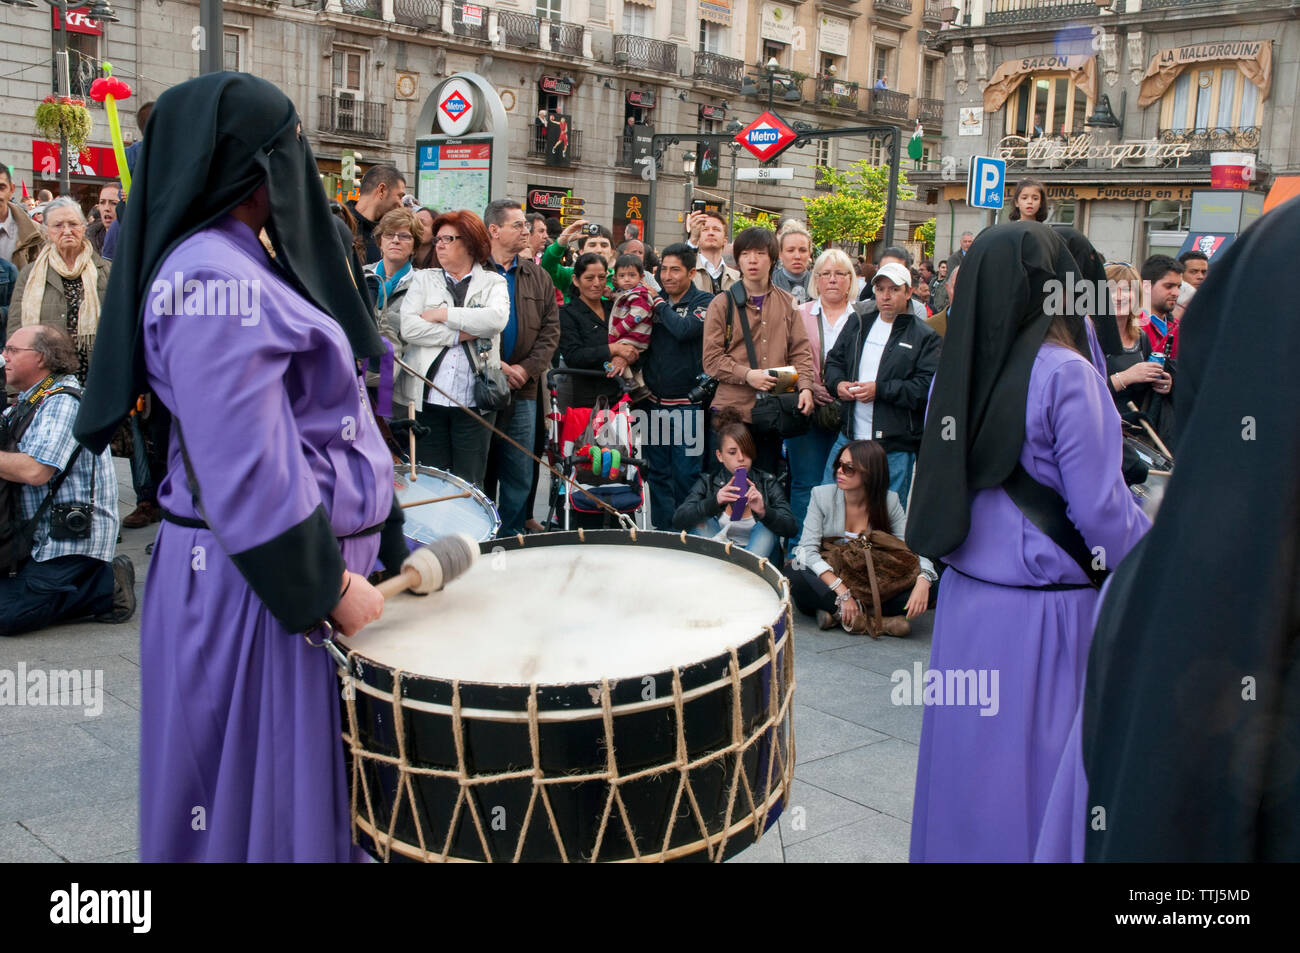 Drumming in a Holy Week procession. Madrid, Spain. Stock Photo